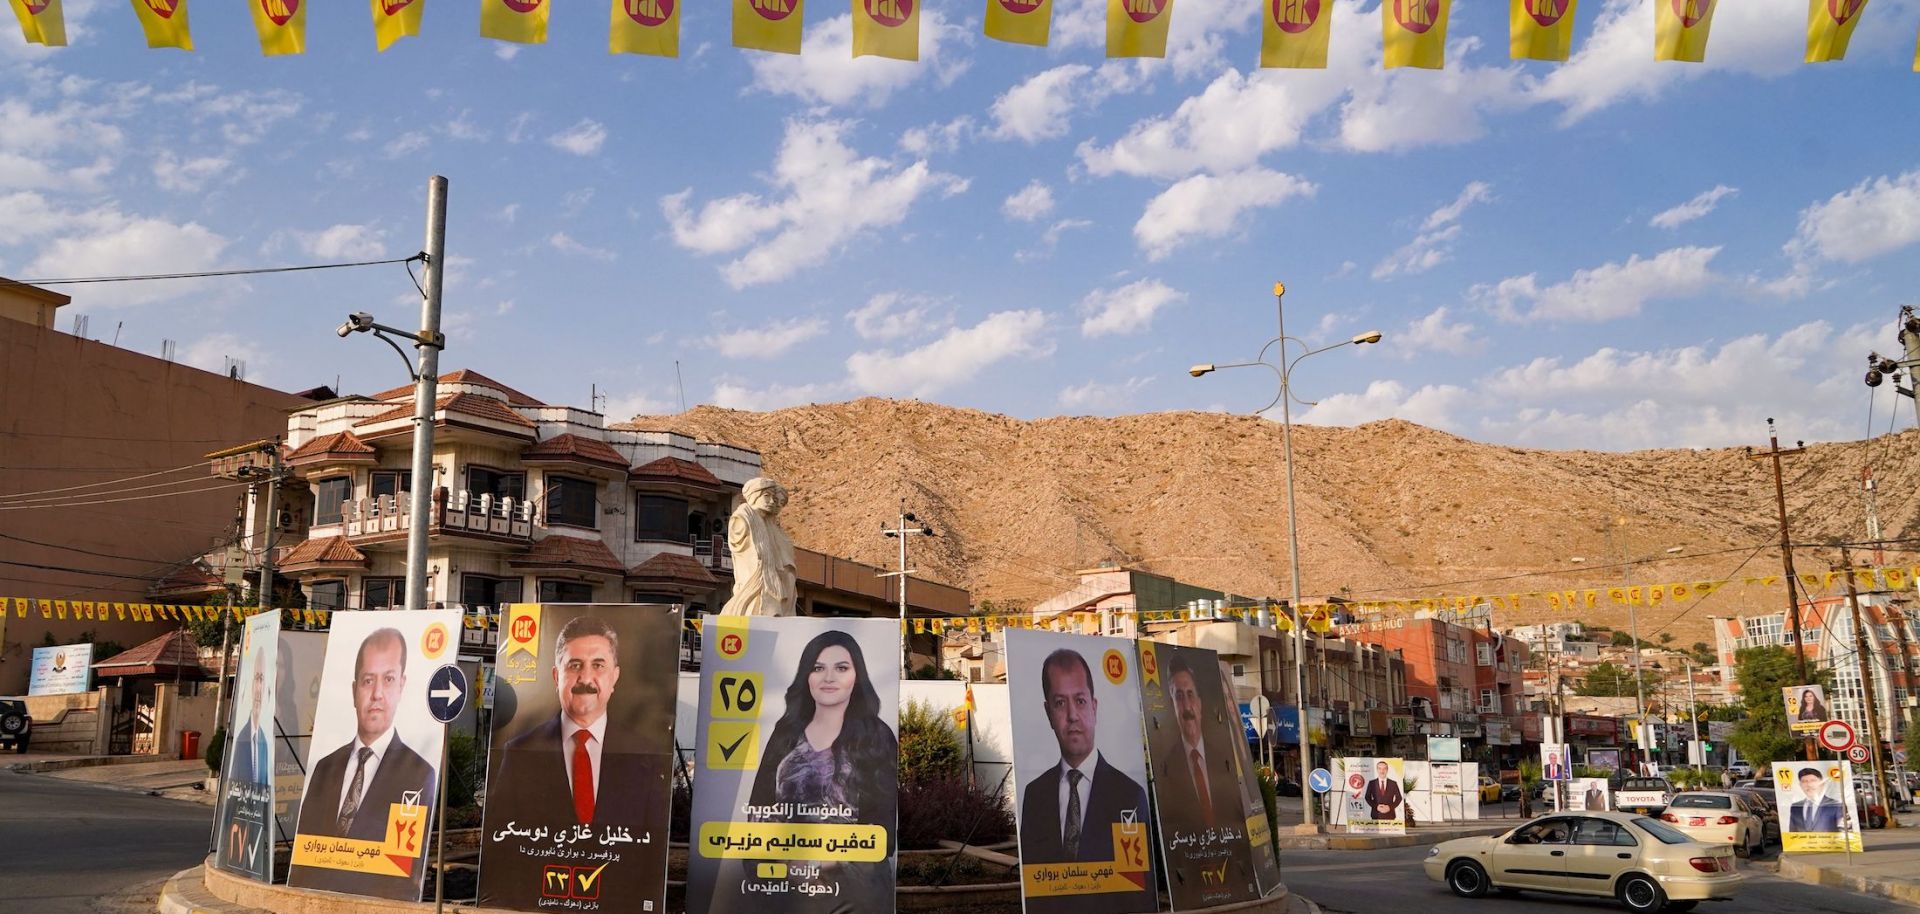 Electoral posters on Oct. 3, 2021, in the northern Iraqi city of Dohuk in the autonomous Kurdish region ahead of the upcoming parliamentary elections.